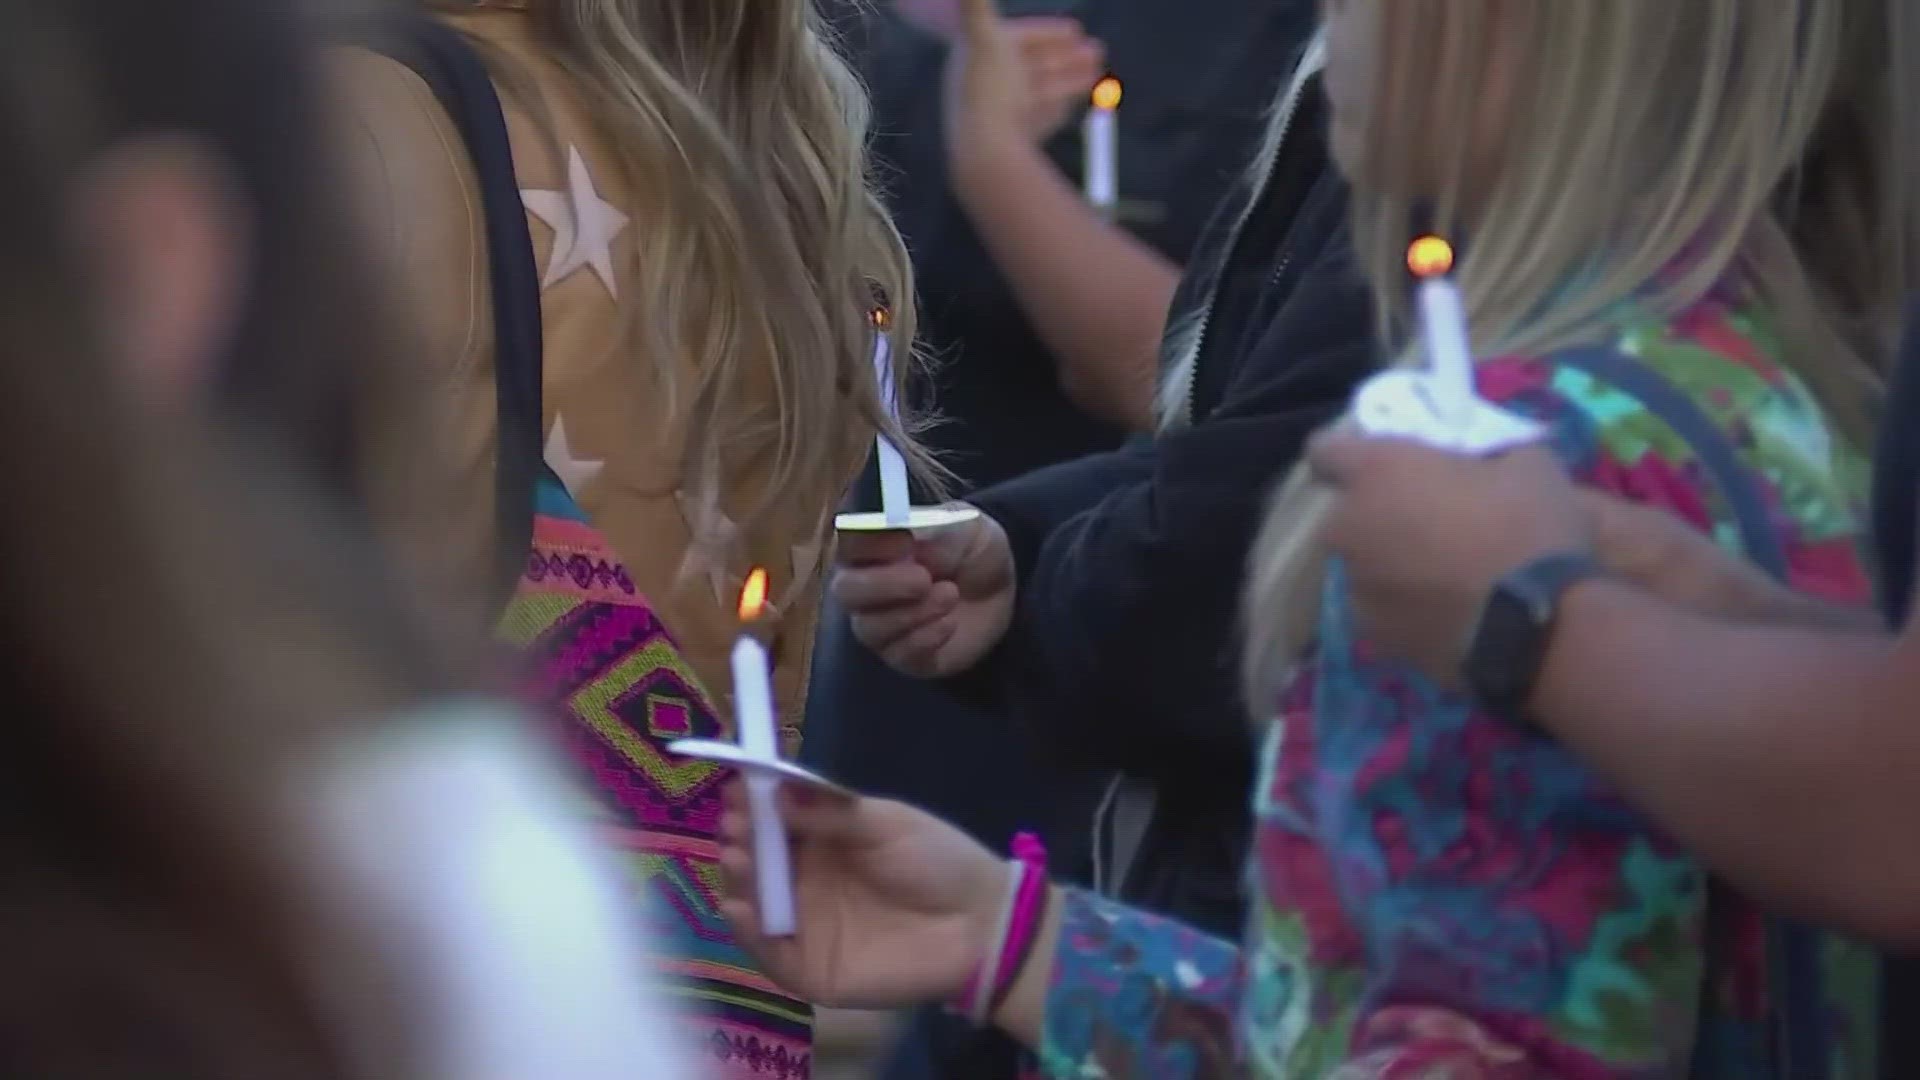 Hundreds of people gathered to remember the six victims of The Covenant School shooting. The family of a 61-year-old custodian who was among those killed attended.